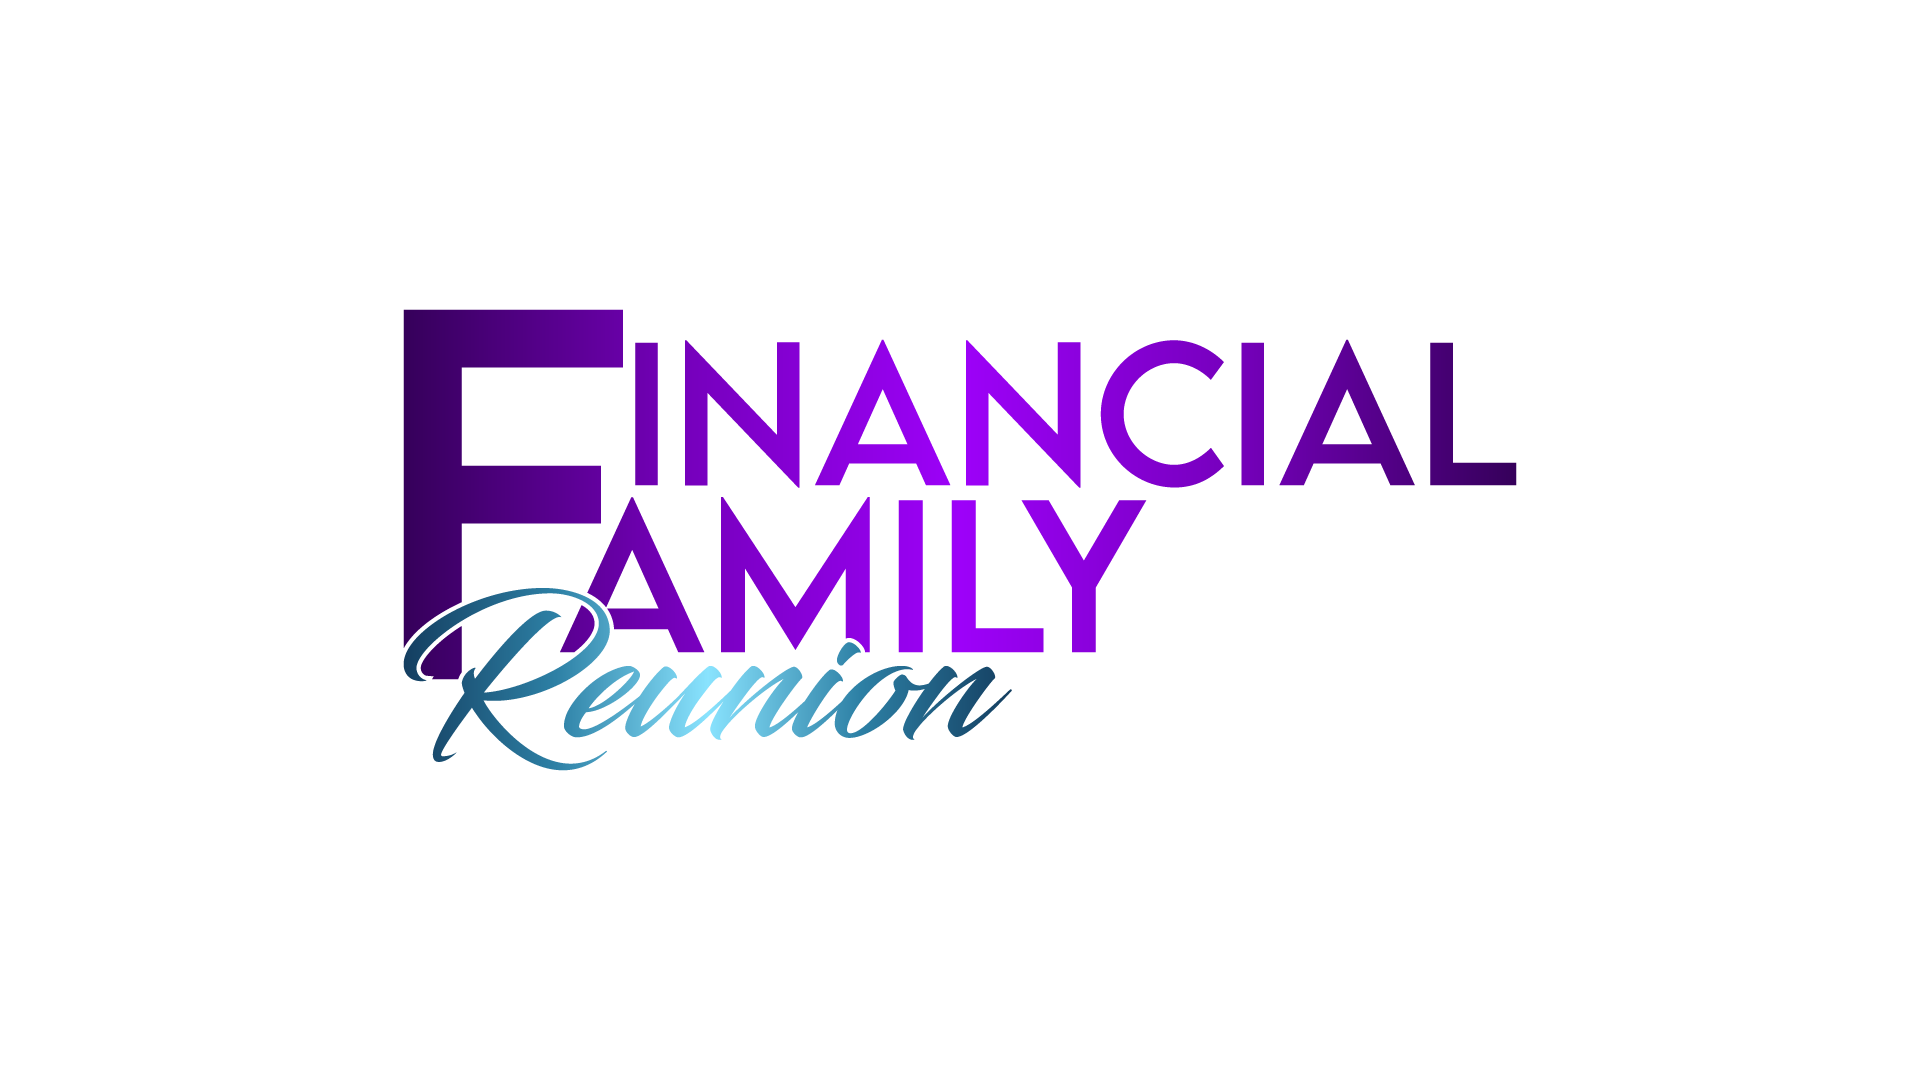 Celebrate Black History Month With Financial Joy School’s 1st Annual Financial Family Reunion Summit  